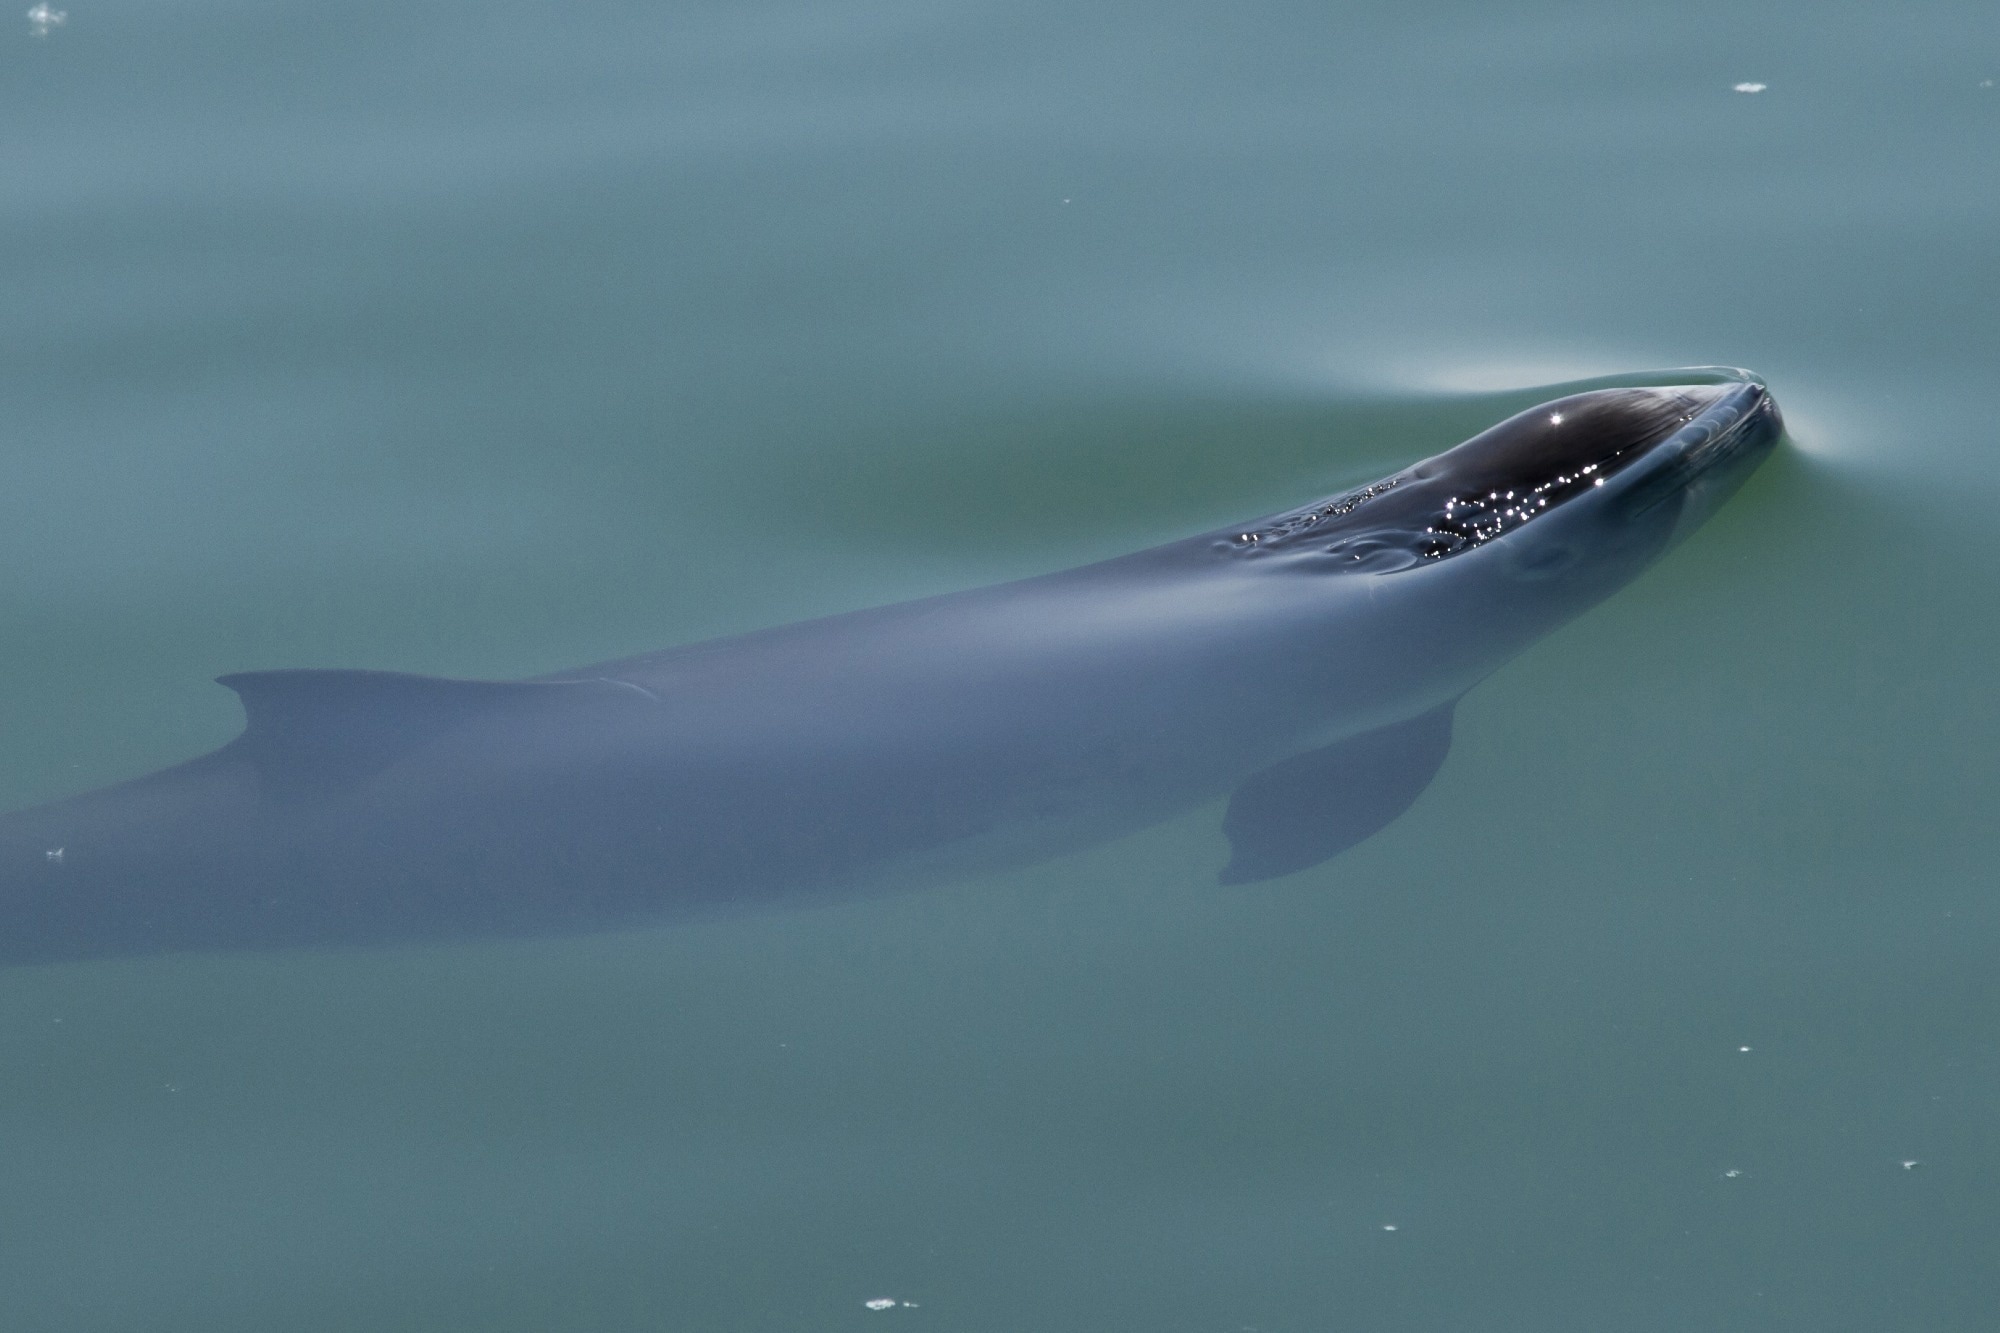 Research Letter - Highly Pathogenic Avian Influenza A(H5N1) Virus in a Harbor Porpoise, Sweden. Image Credit: ErnstS / Shutterstock